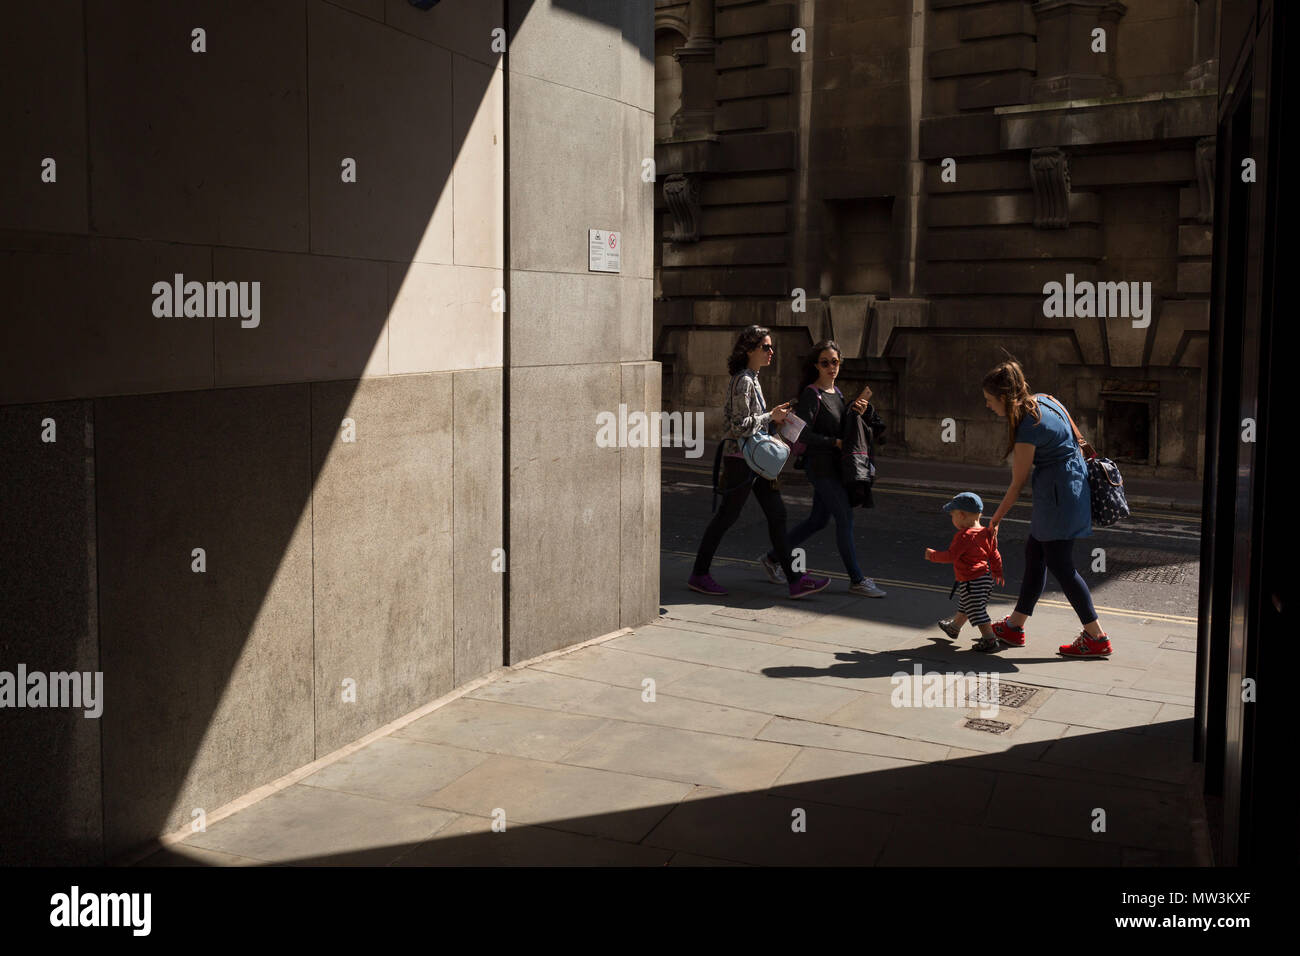 A mother and small child in Lombard Street in the City of London, the capital's financial district aka the Square Mile, on 15th May 2018, in London, UK. Stock Photo